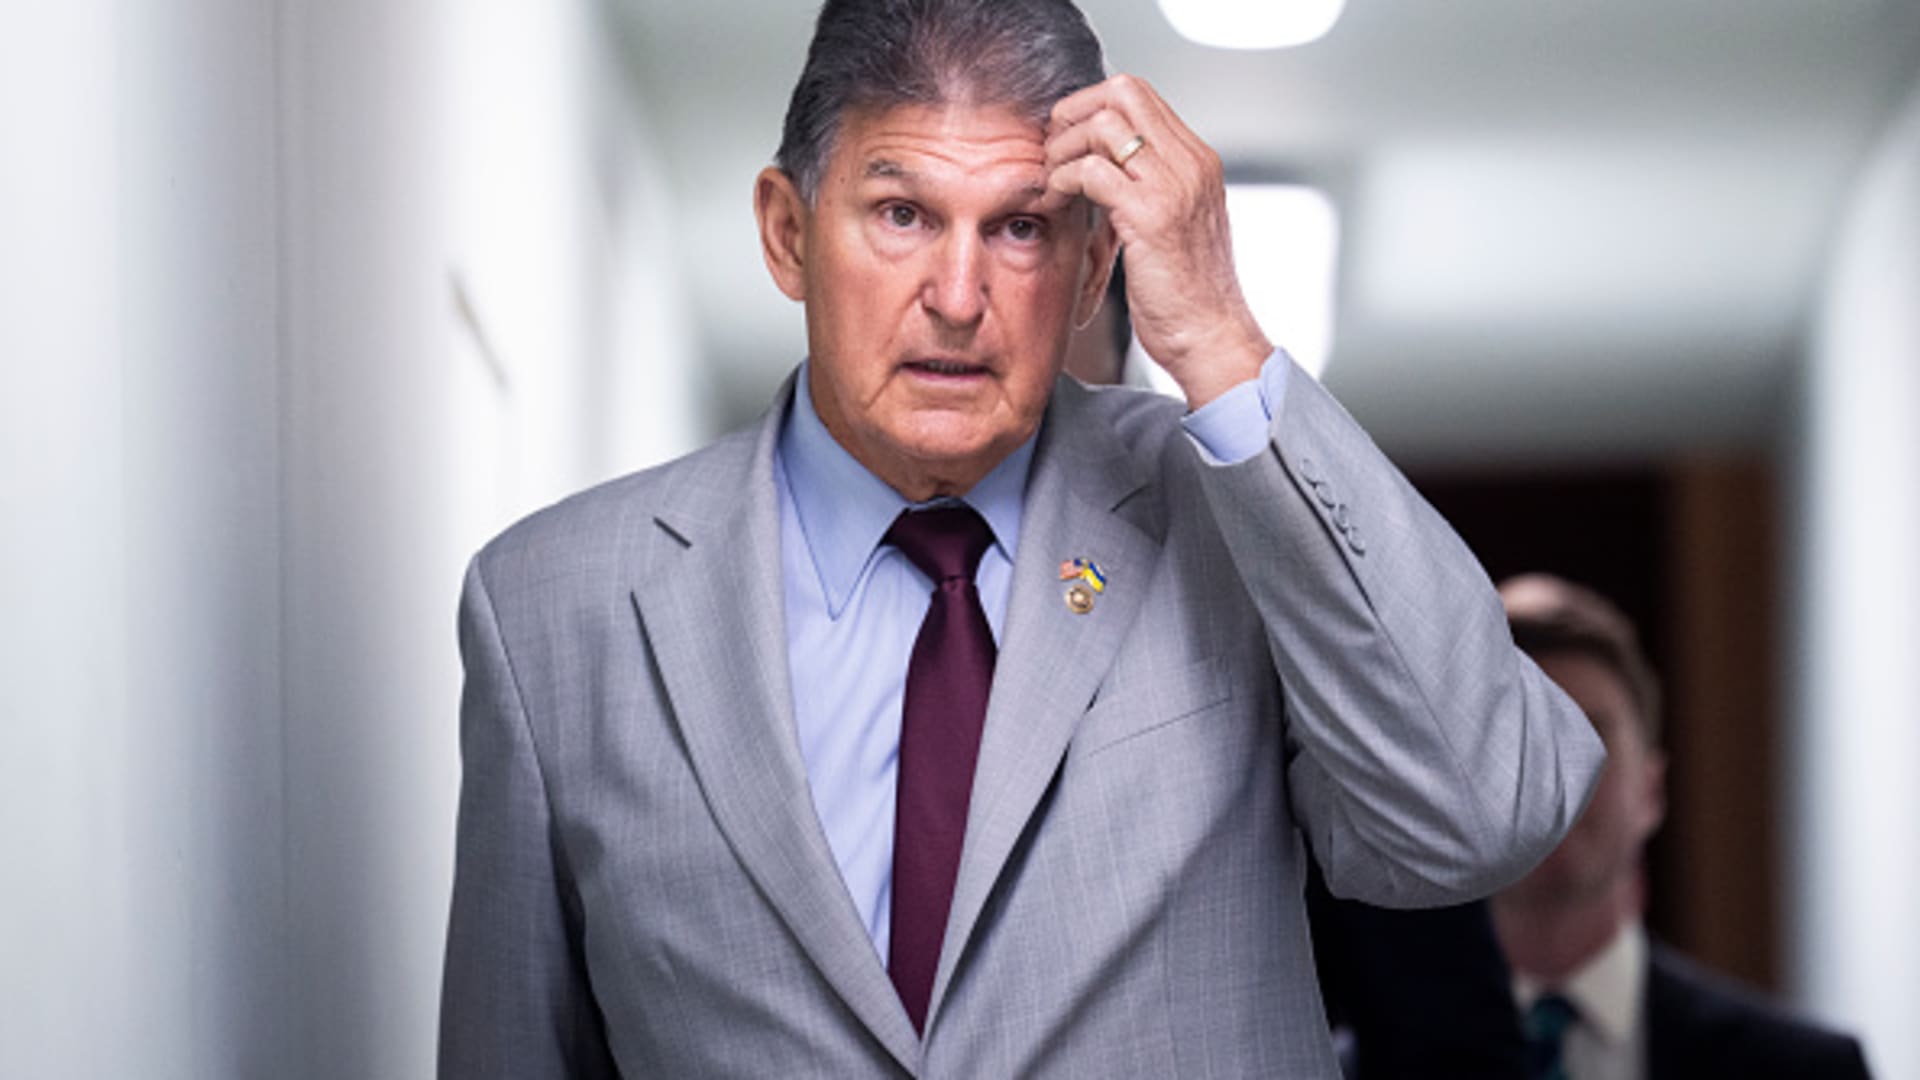 Manchin touts inflation reduction bill, says 'I'm not getting involved' in upcoming elections - CNBC